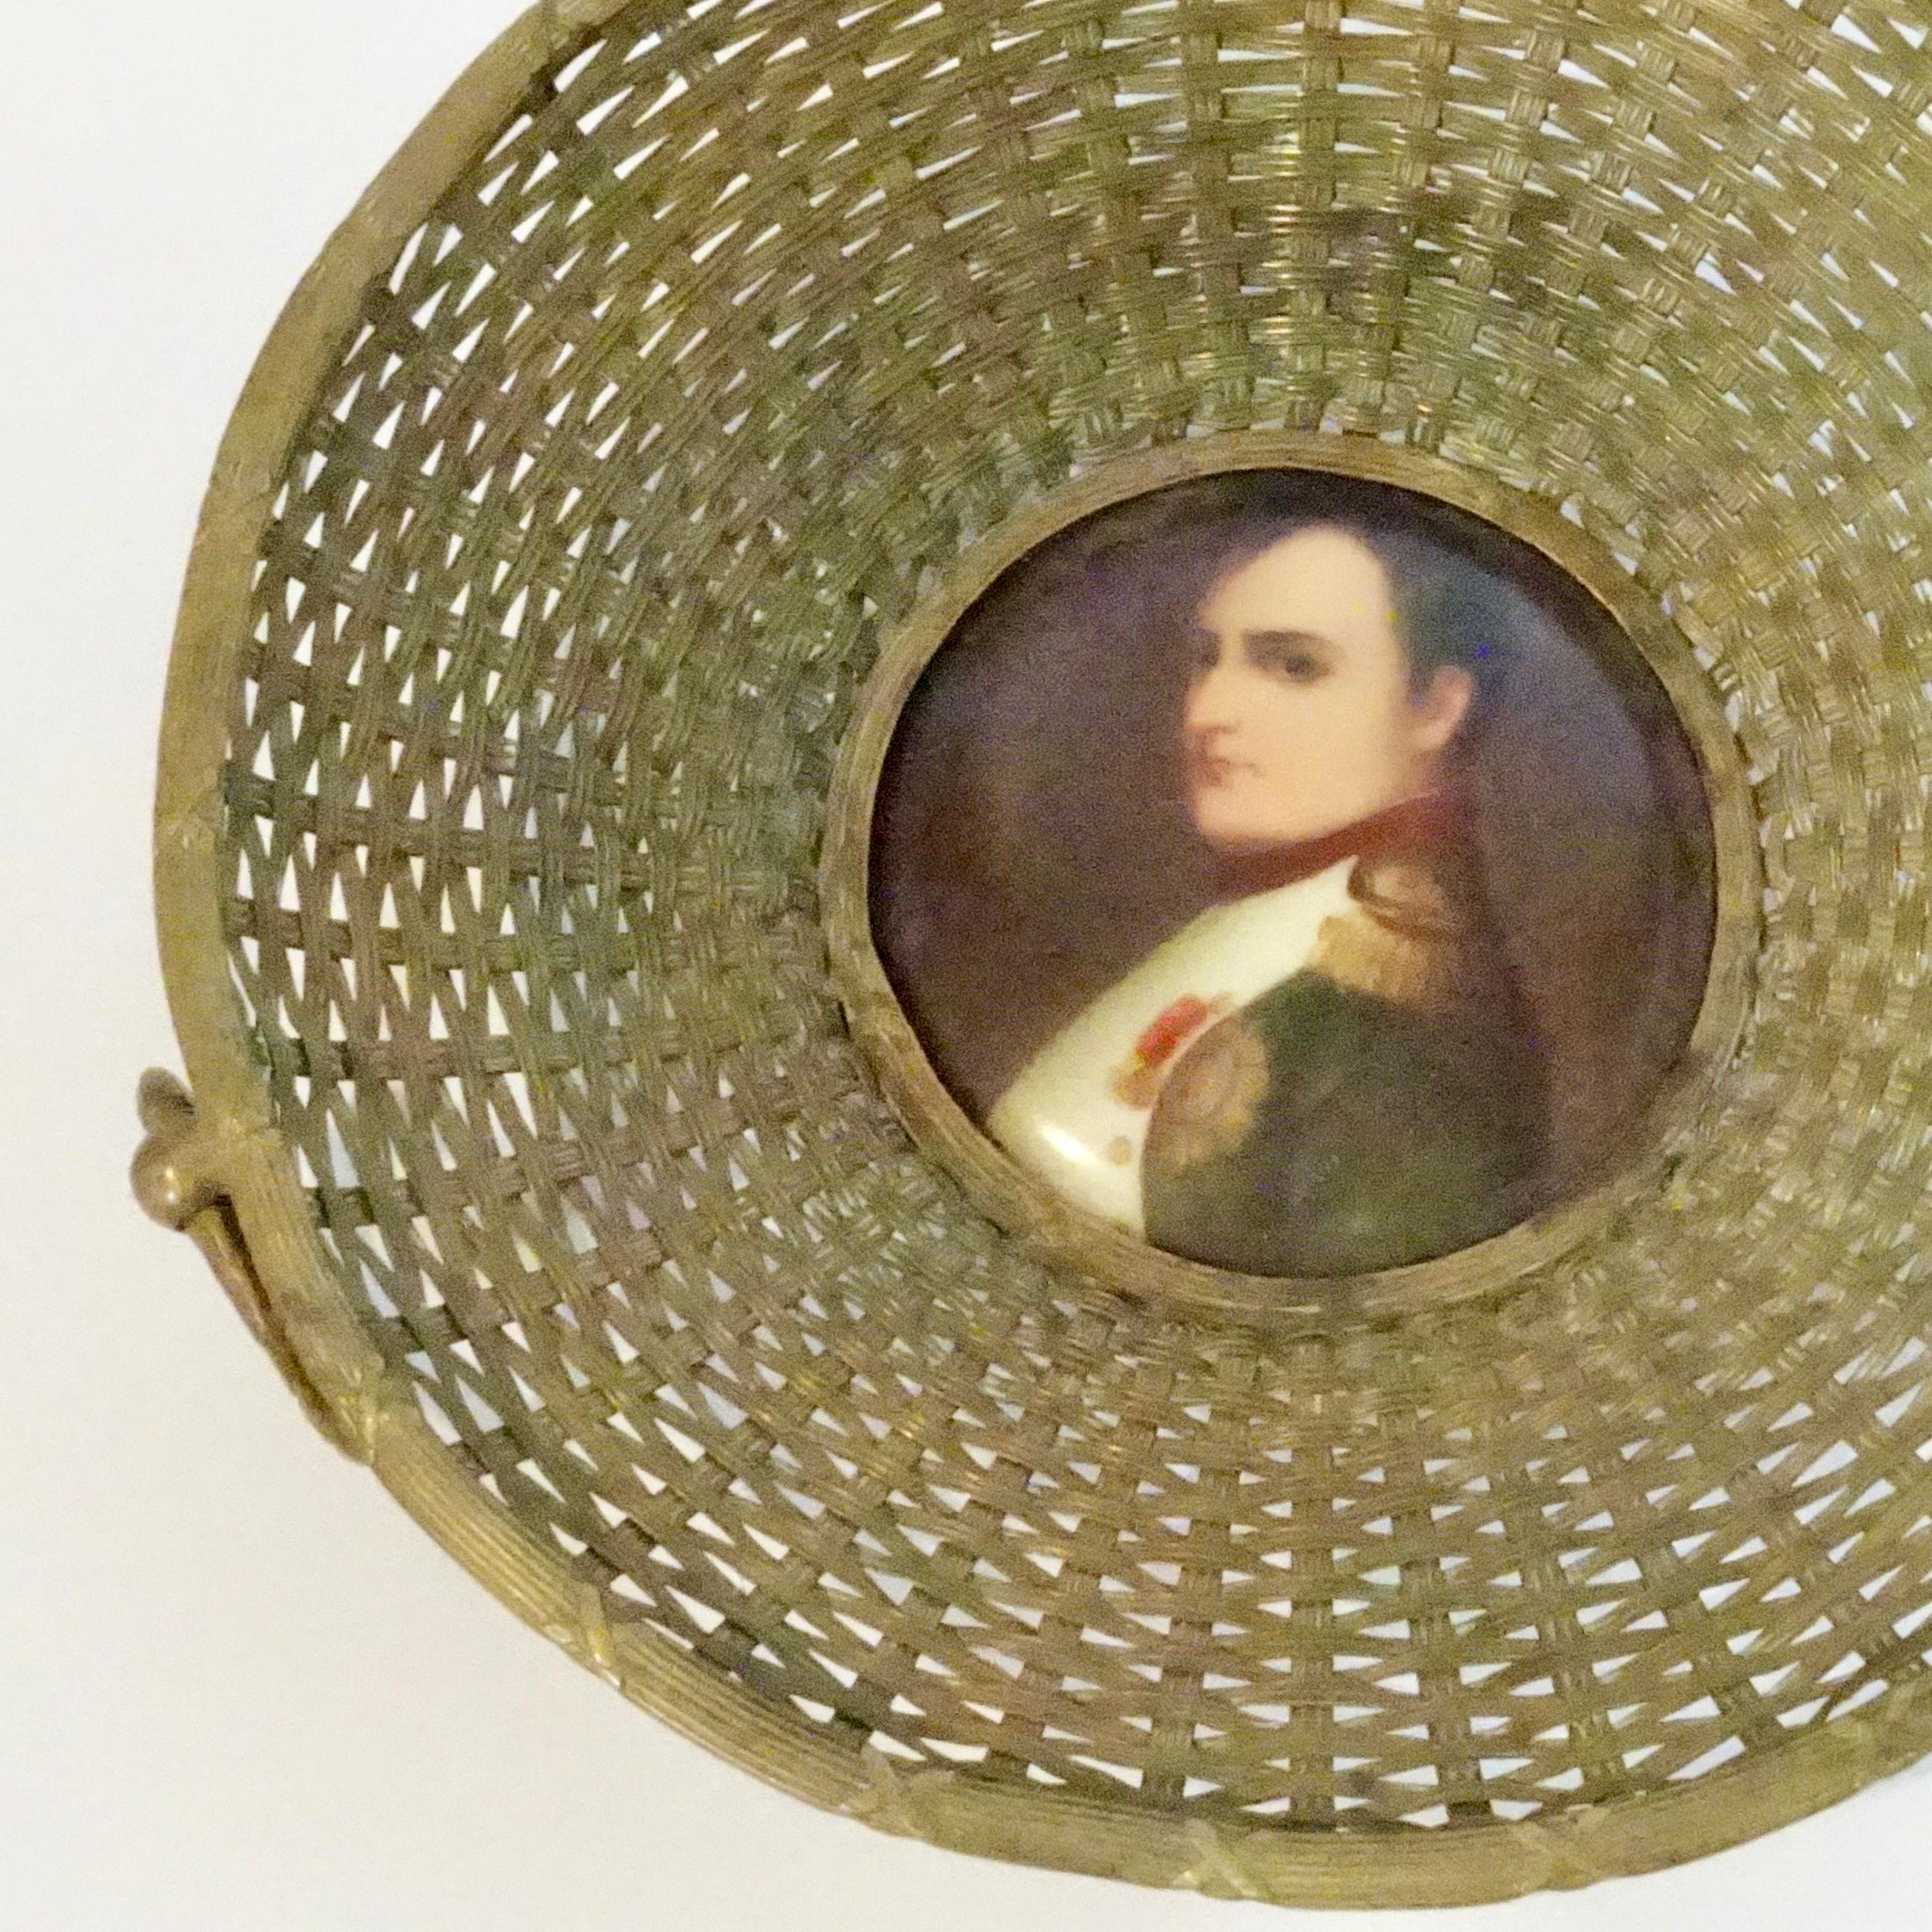 This is a stunning 19th century French woven basket with three circular handles. There is a beautifully detailed painting of Napoleon displayed in the center.